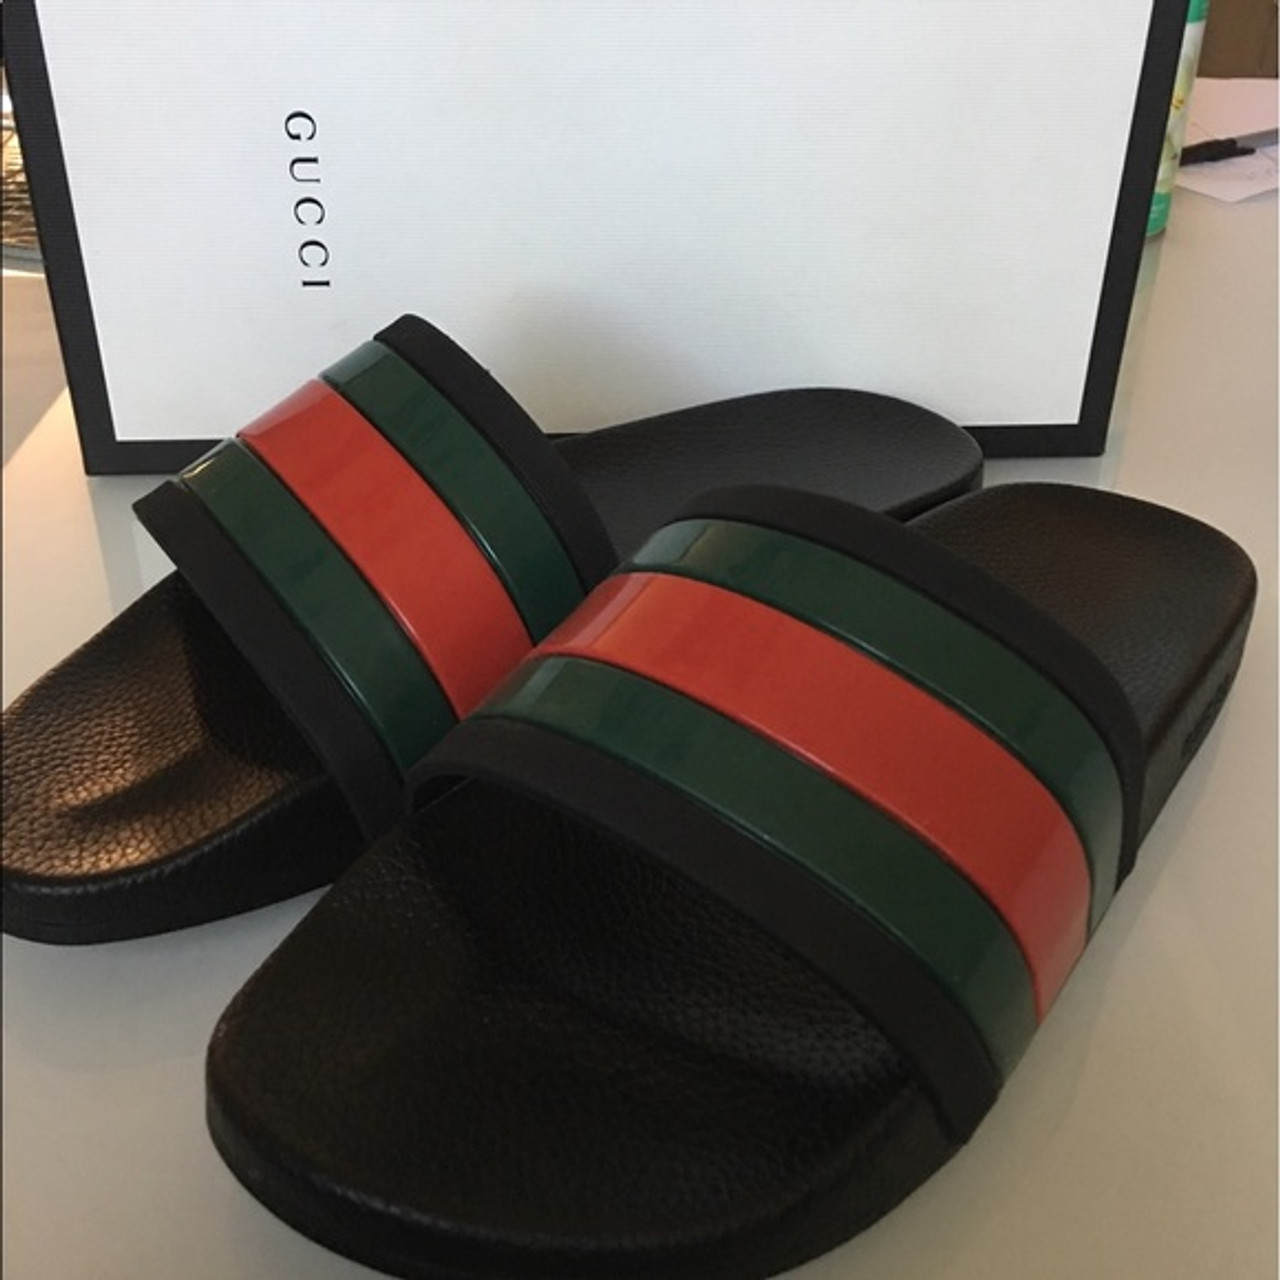 where to buy the best stockX High quality replica UA Gucci flip flops (select color) Hypedripz is the best high quality trusted clone replica fake designer seller website 2021